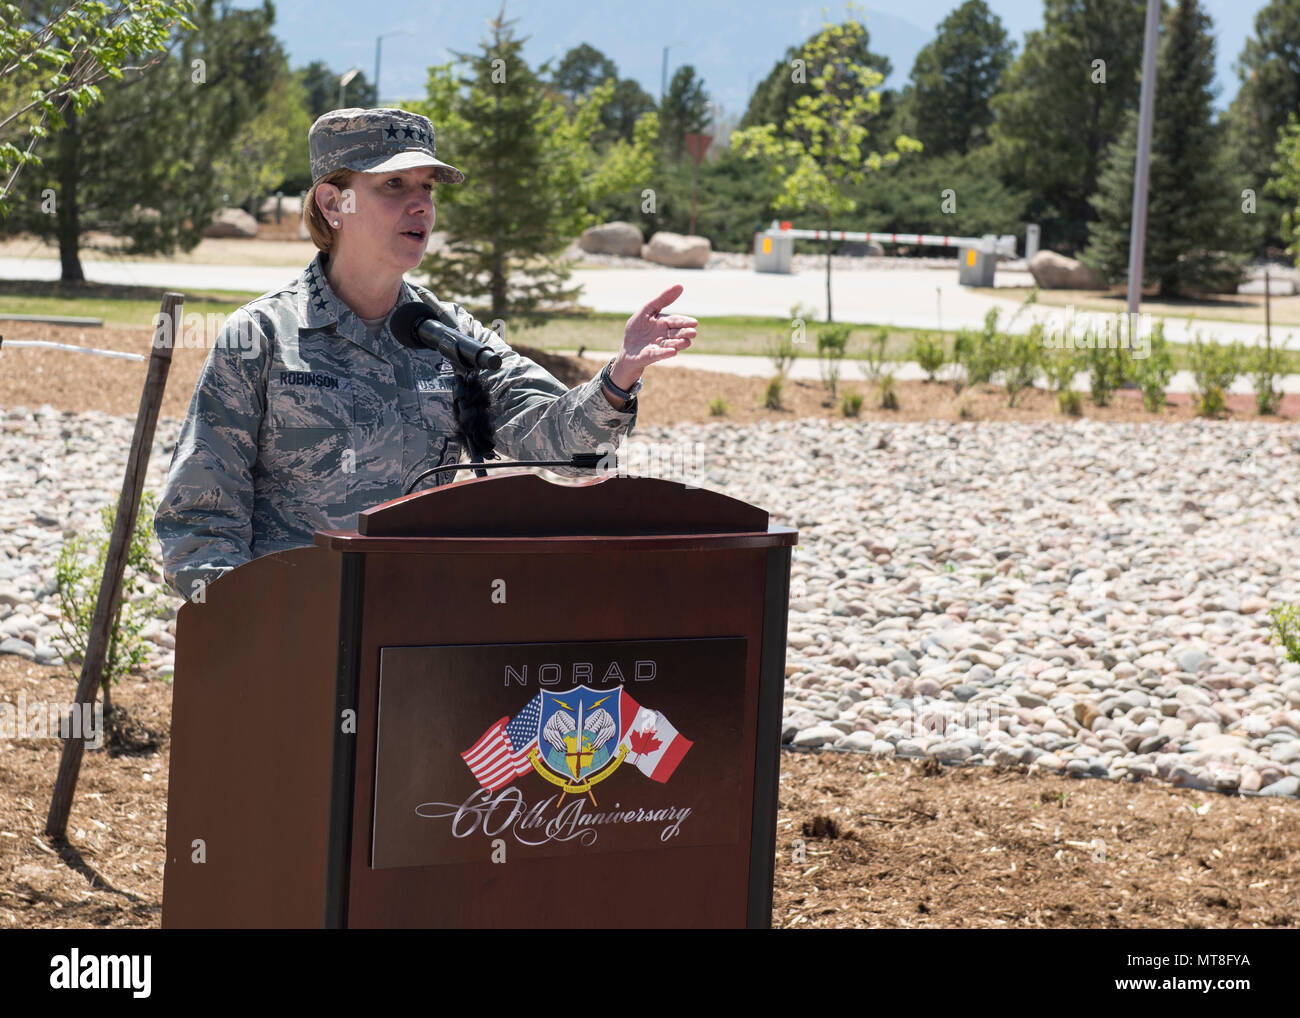 U.S. Air Force General Lori Robinson, Commander of the North American Aerospace Defense Command and U.S. Northern Command speaks during the unveiling ceremony for a memorial cairn outside the NORAD and USNORTHCOM headquarters building on Peterson Air Force Base, Colorado, May 11. The cairn honors the Canadian service men and women who passed away while serving at NORAD in Colorado Springs. The placement and dedication of the cairn was conducted in conjunction with the 60th Anniversary of NORAD and the U.S. Canadian binational NORAD agreement. (DoD Photo By N&NC Public Affairs) Stock Photo